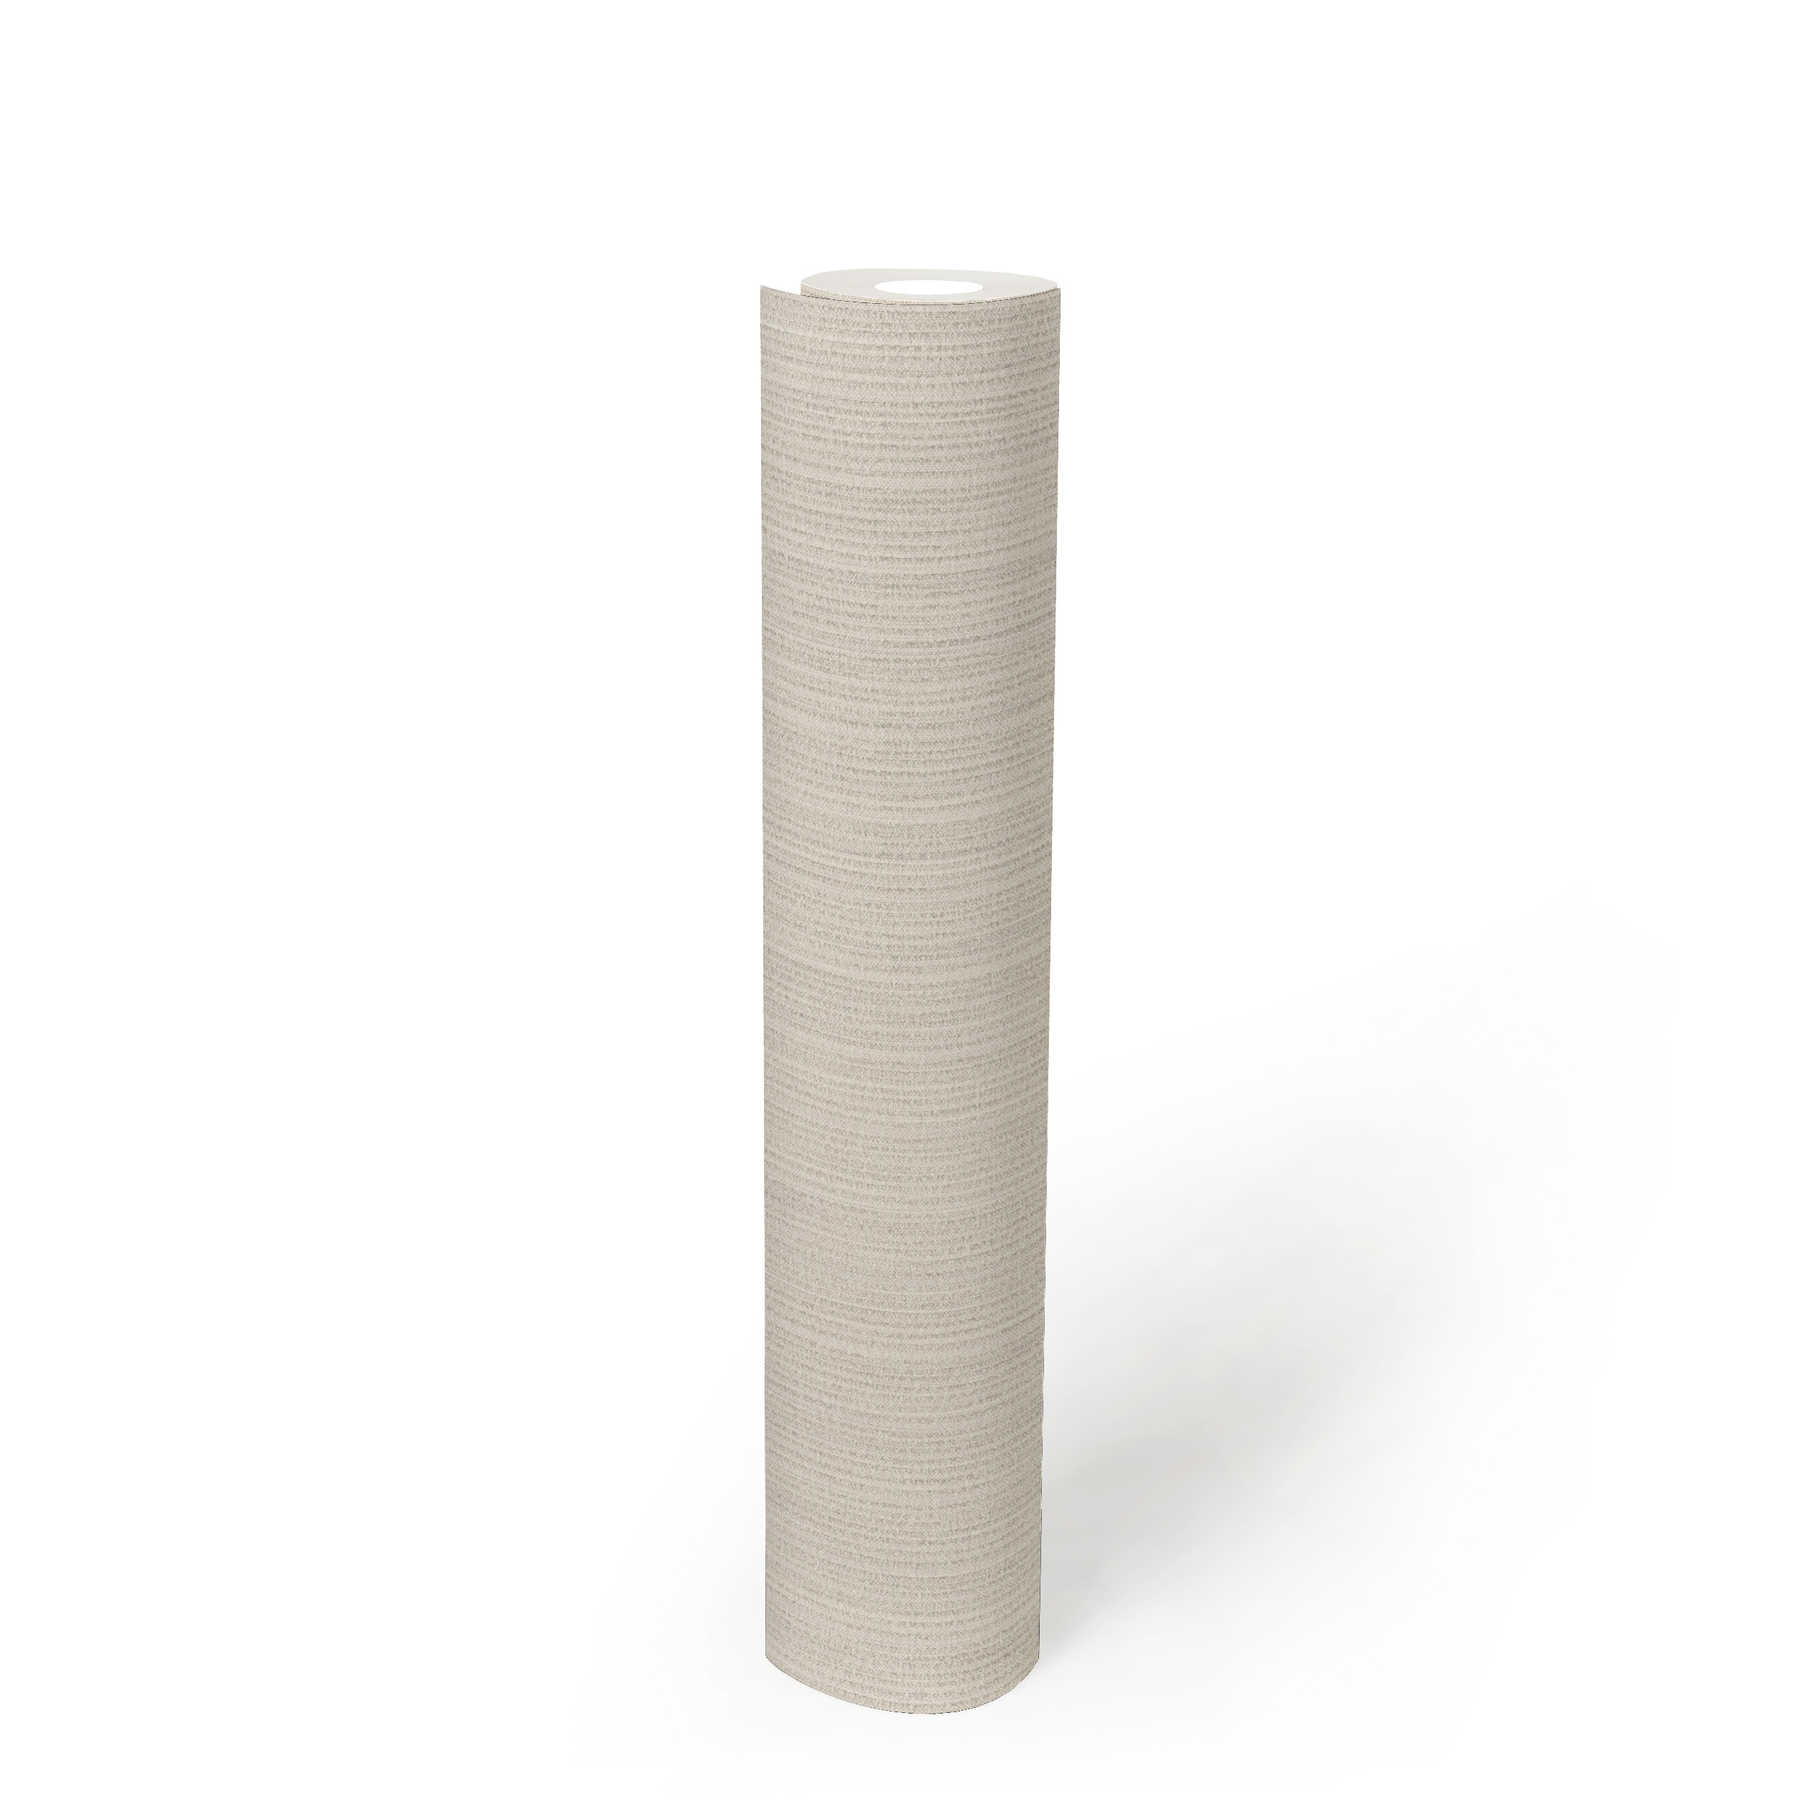             Plain wallpaper with lined structure pattern - beige
        